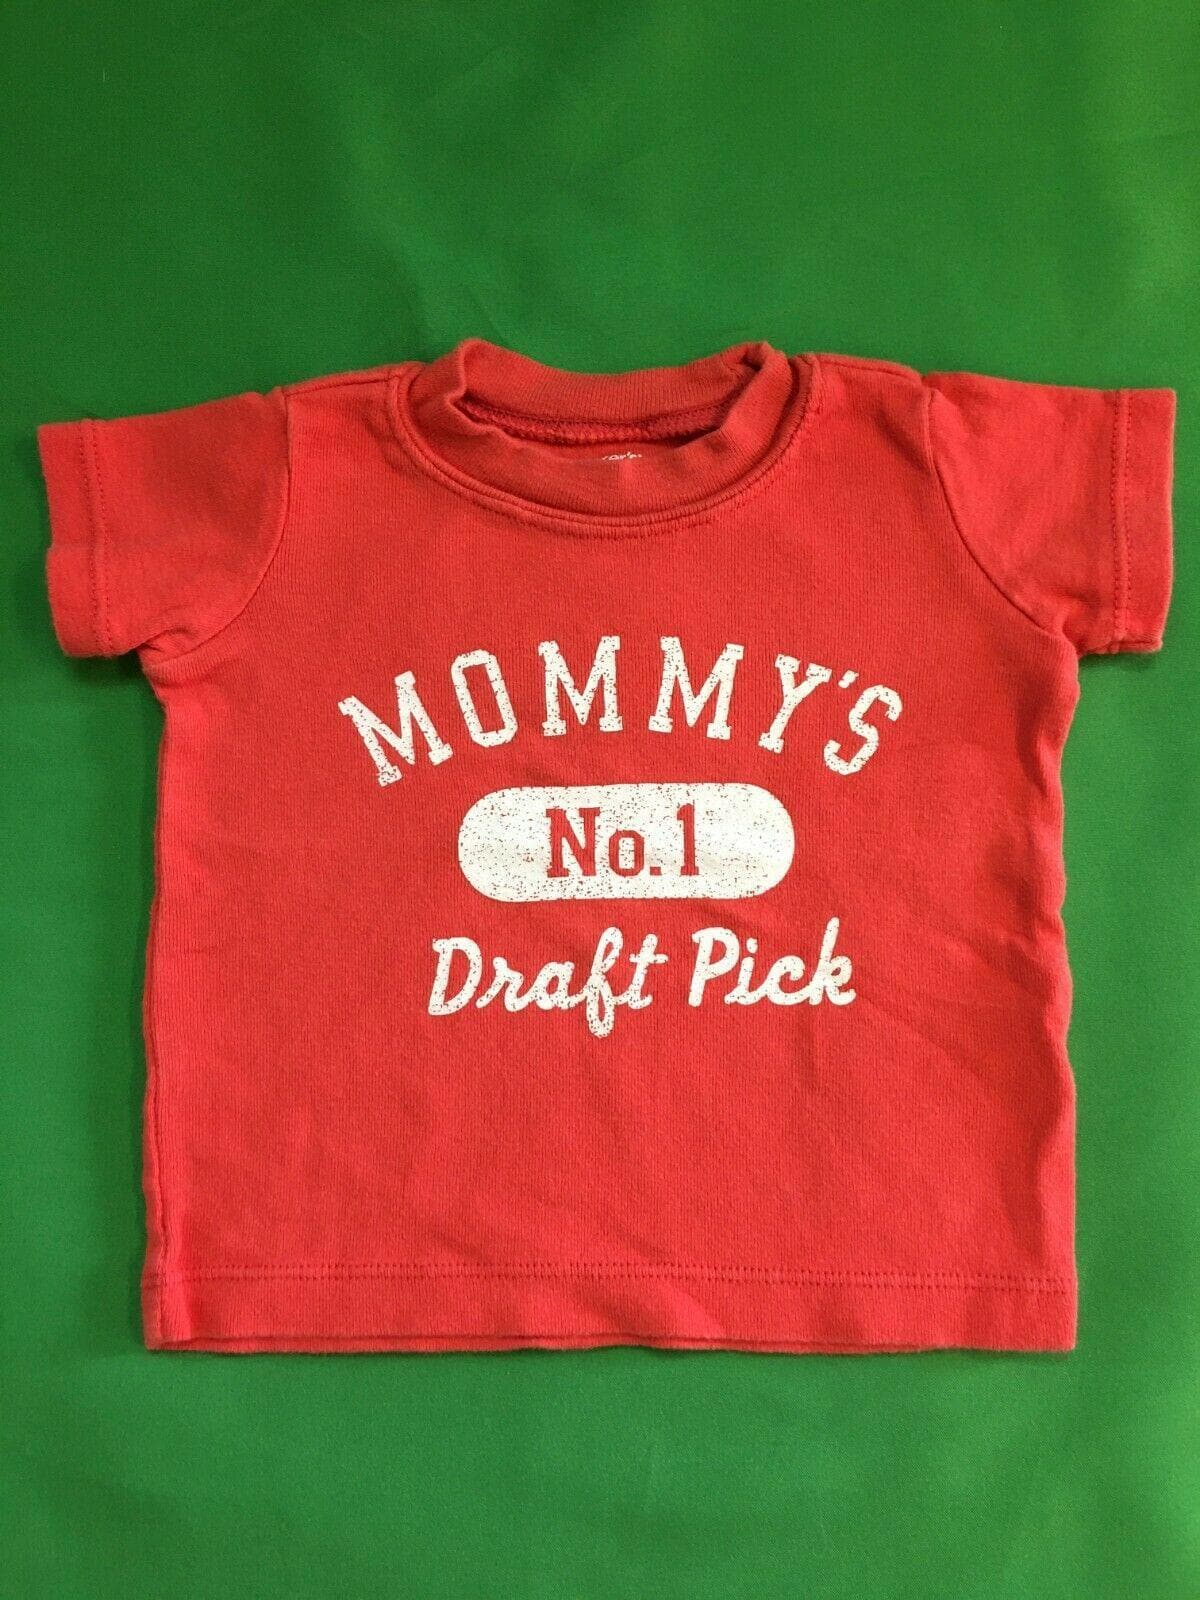 American Football "Mommy's #1 Draft Pick" T-Shirt Infant 3 Months